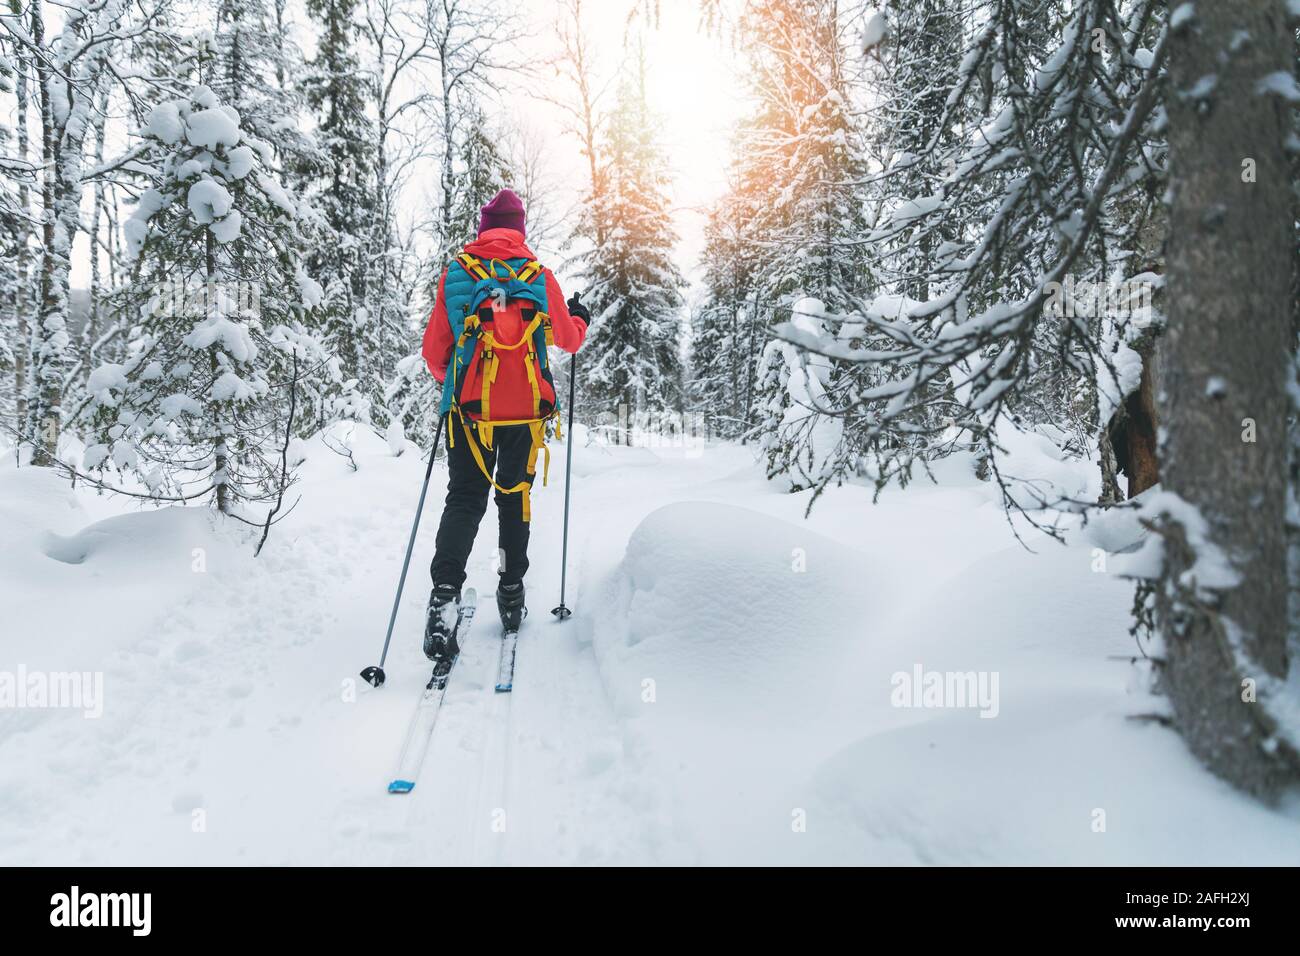 ski touring - woman with skis on a snowy winter forest trail. Yllas, Lapland, Finland Stock Photo